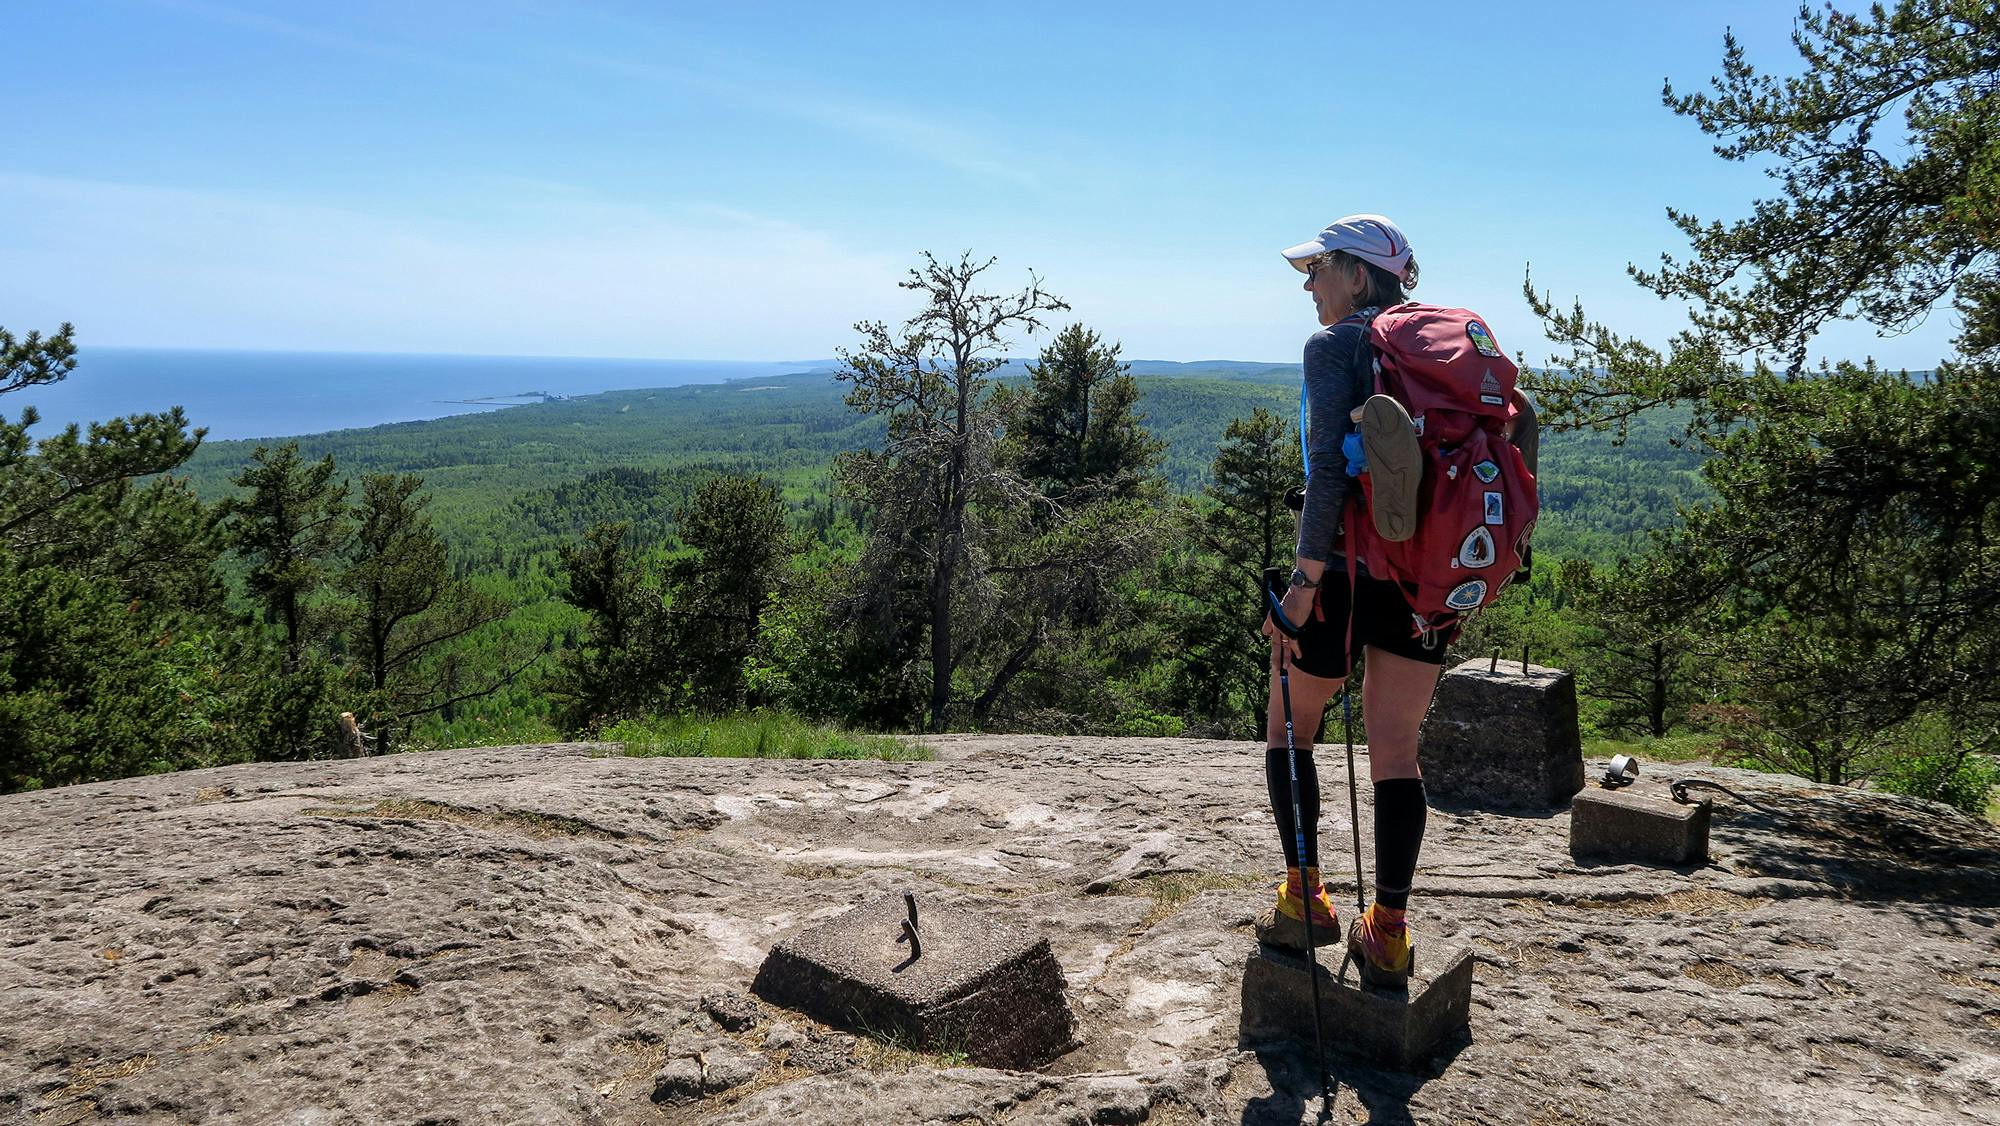 Melanie Radzicki McManus took in the view from the top of Carlton Peak, standing on footings for an old fire tower. Many of these high points along the North Shore are made of igneous rock, compositions of lava that gathered up and solidified millions of years ago.